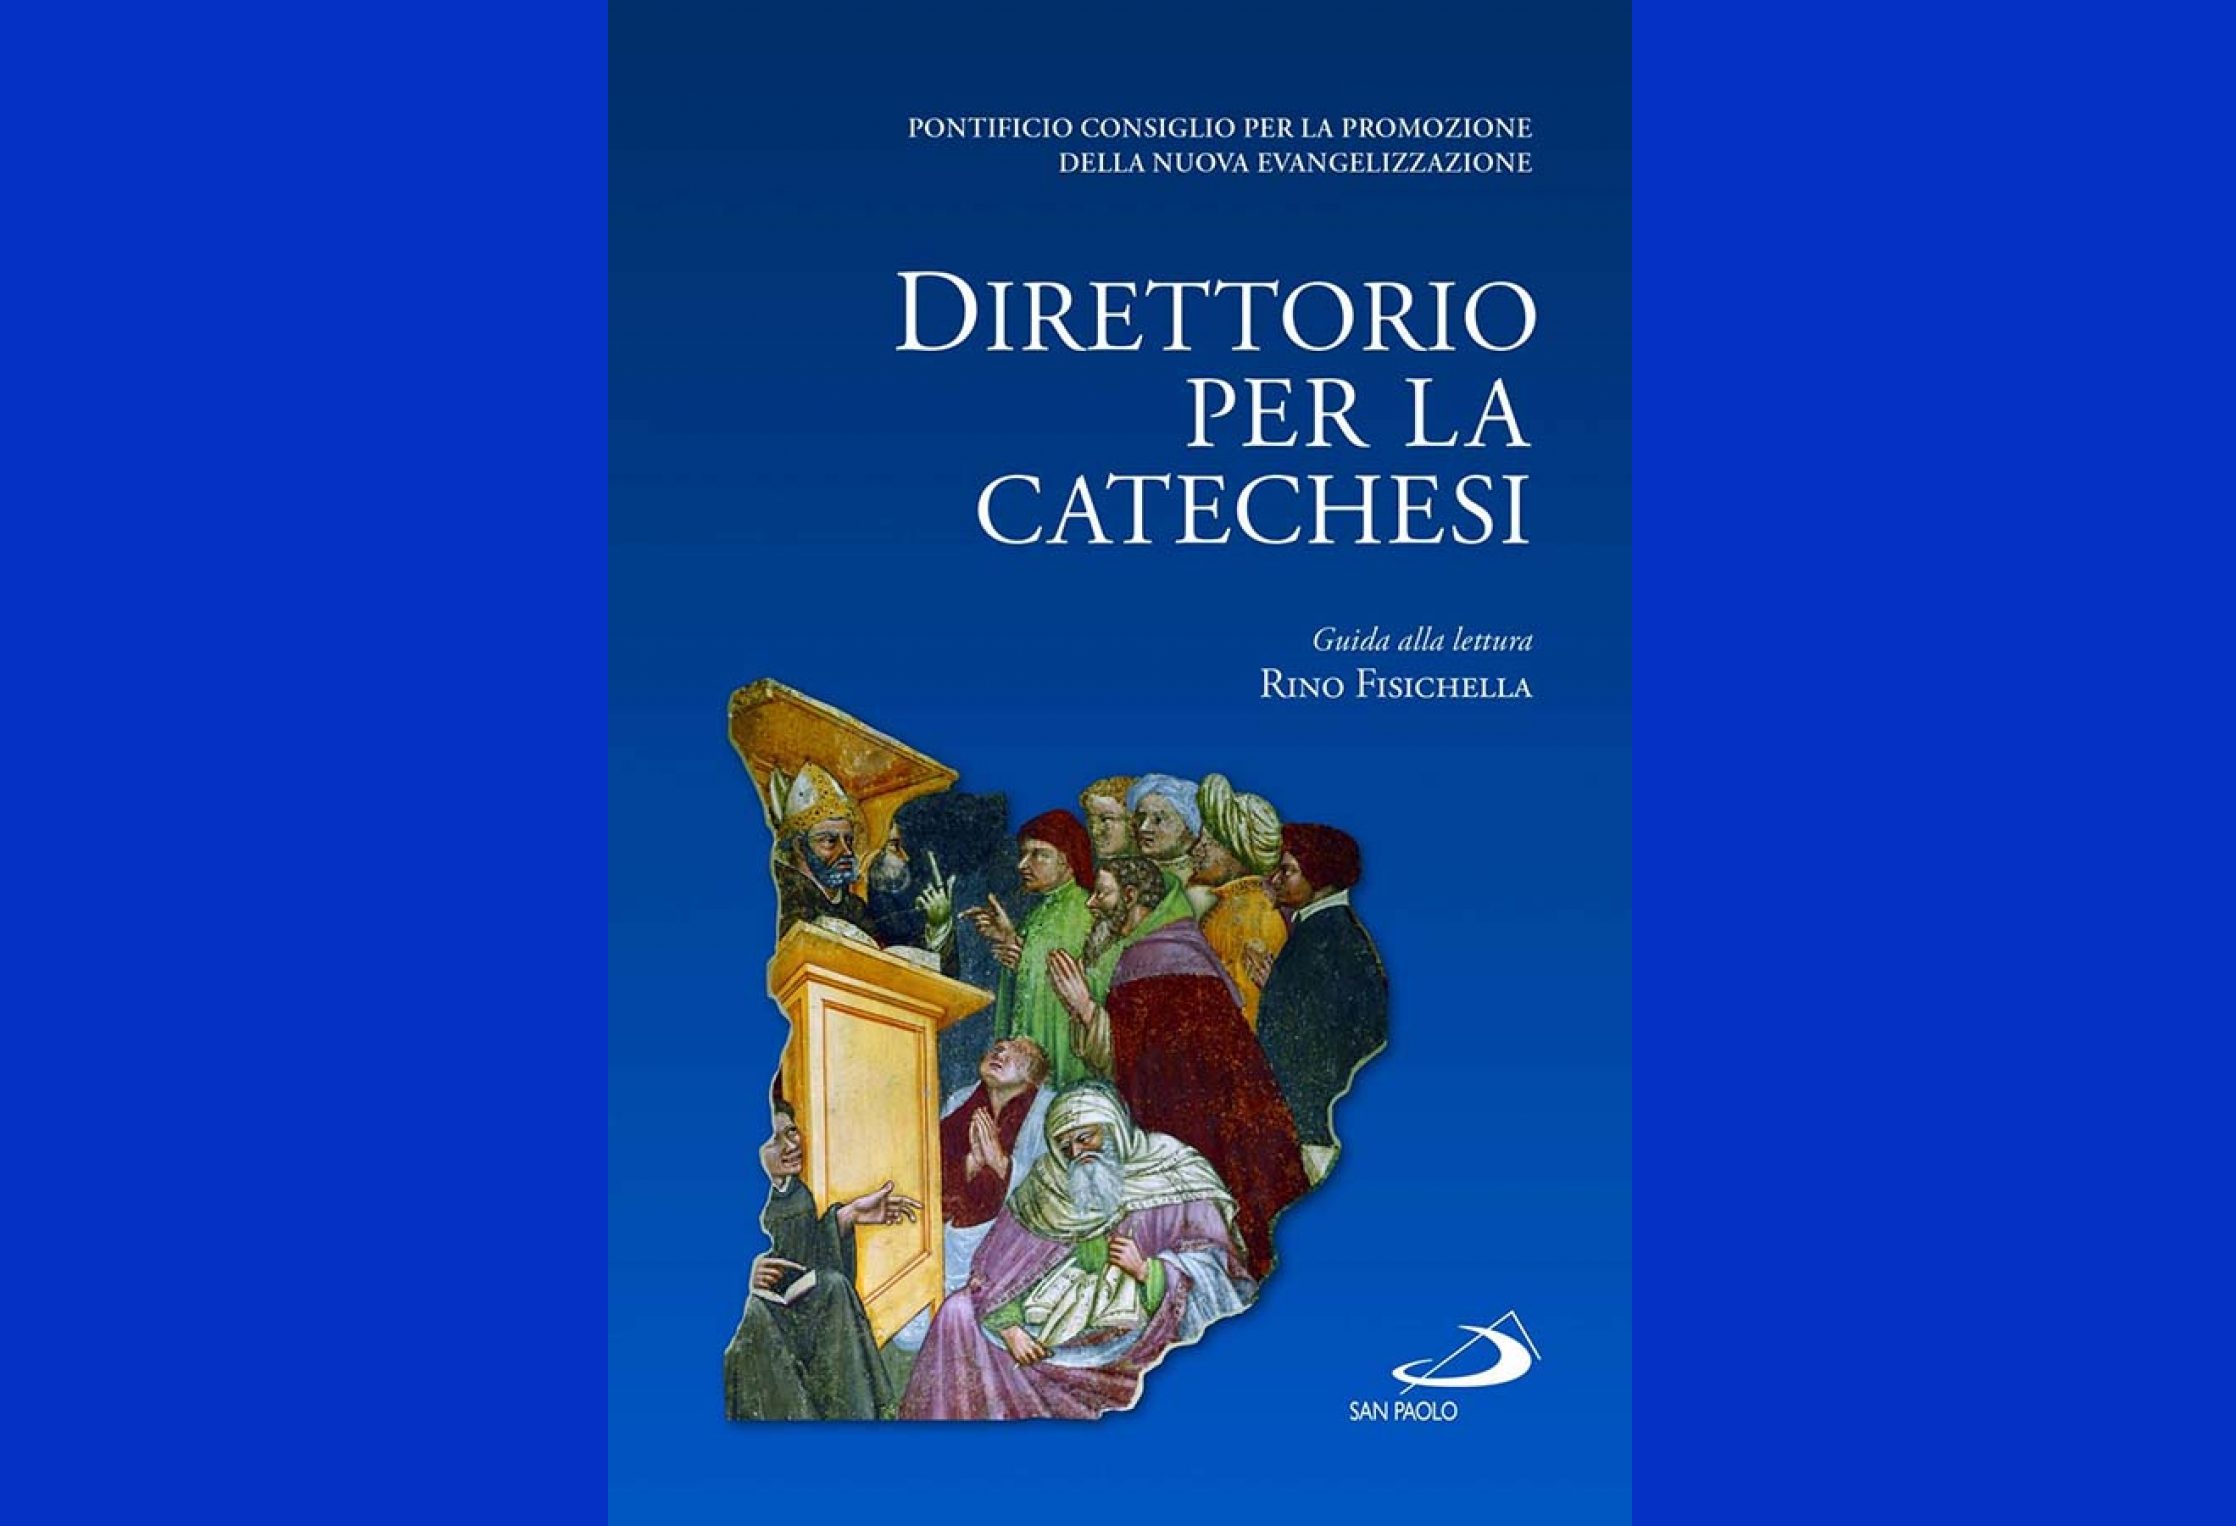 New Directory for Catechesis